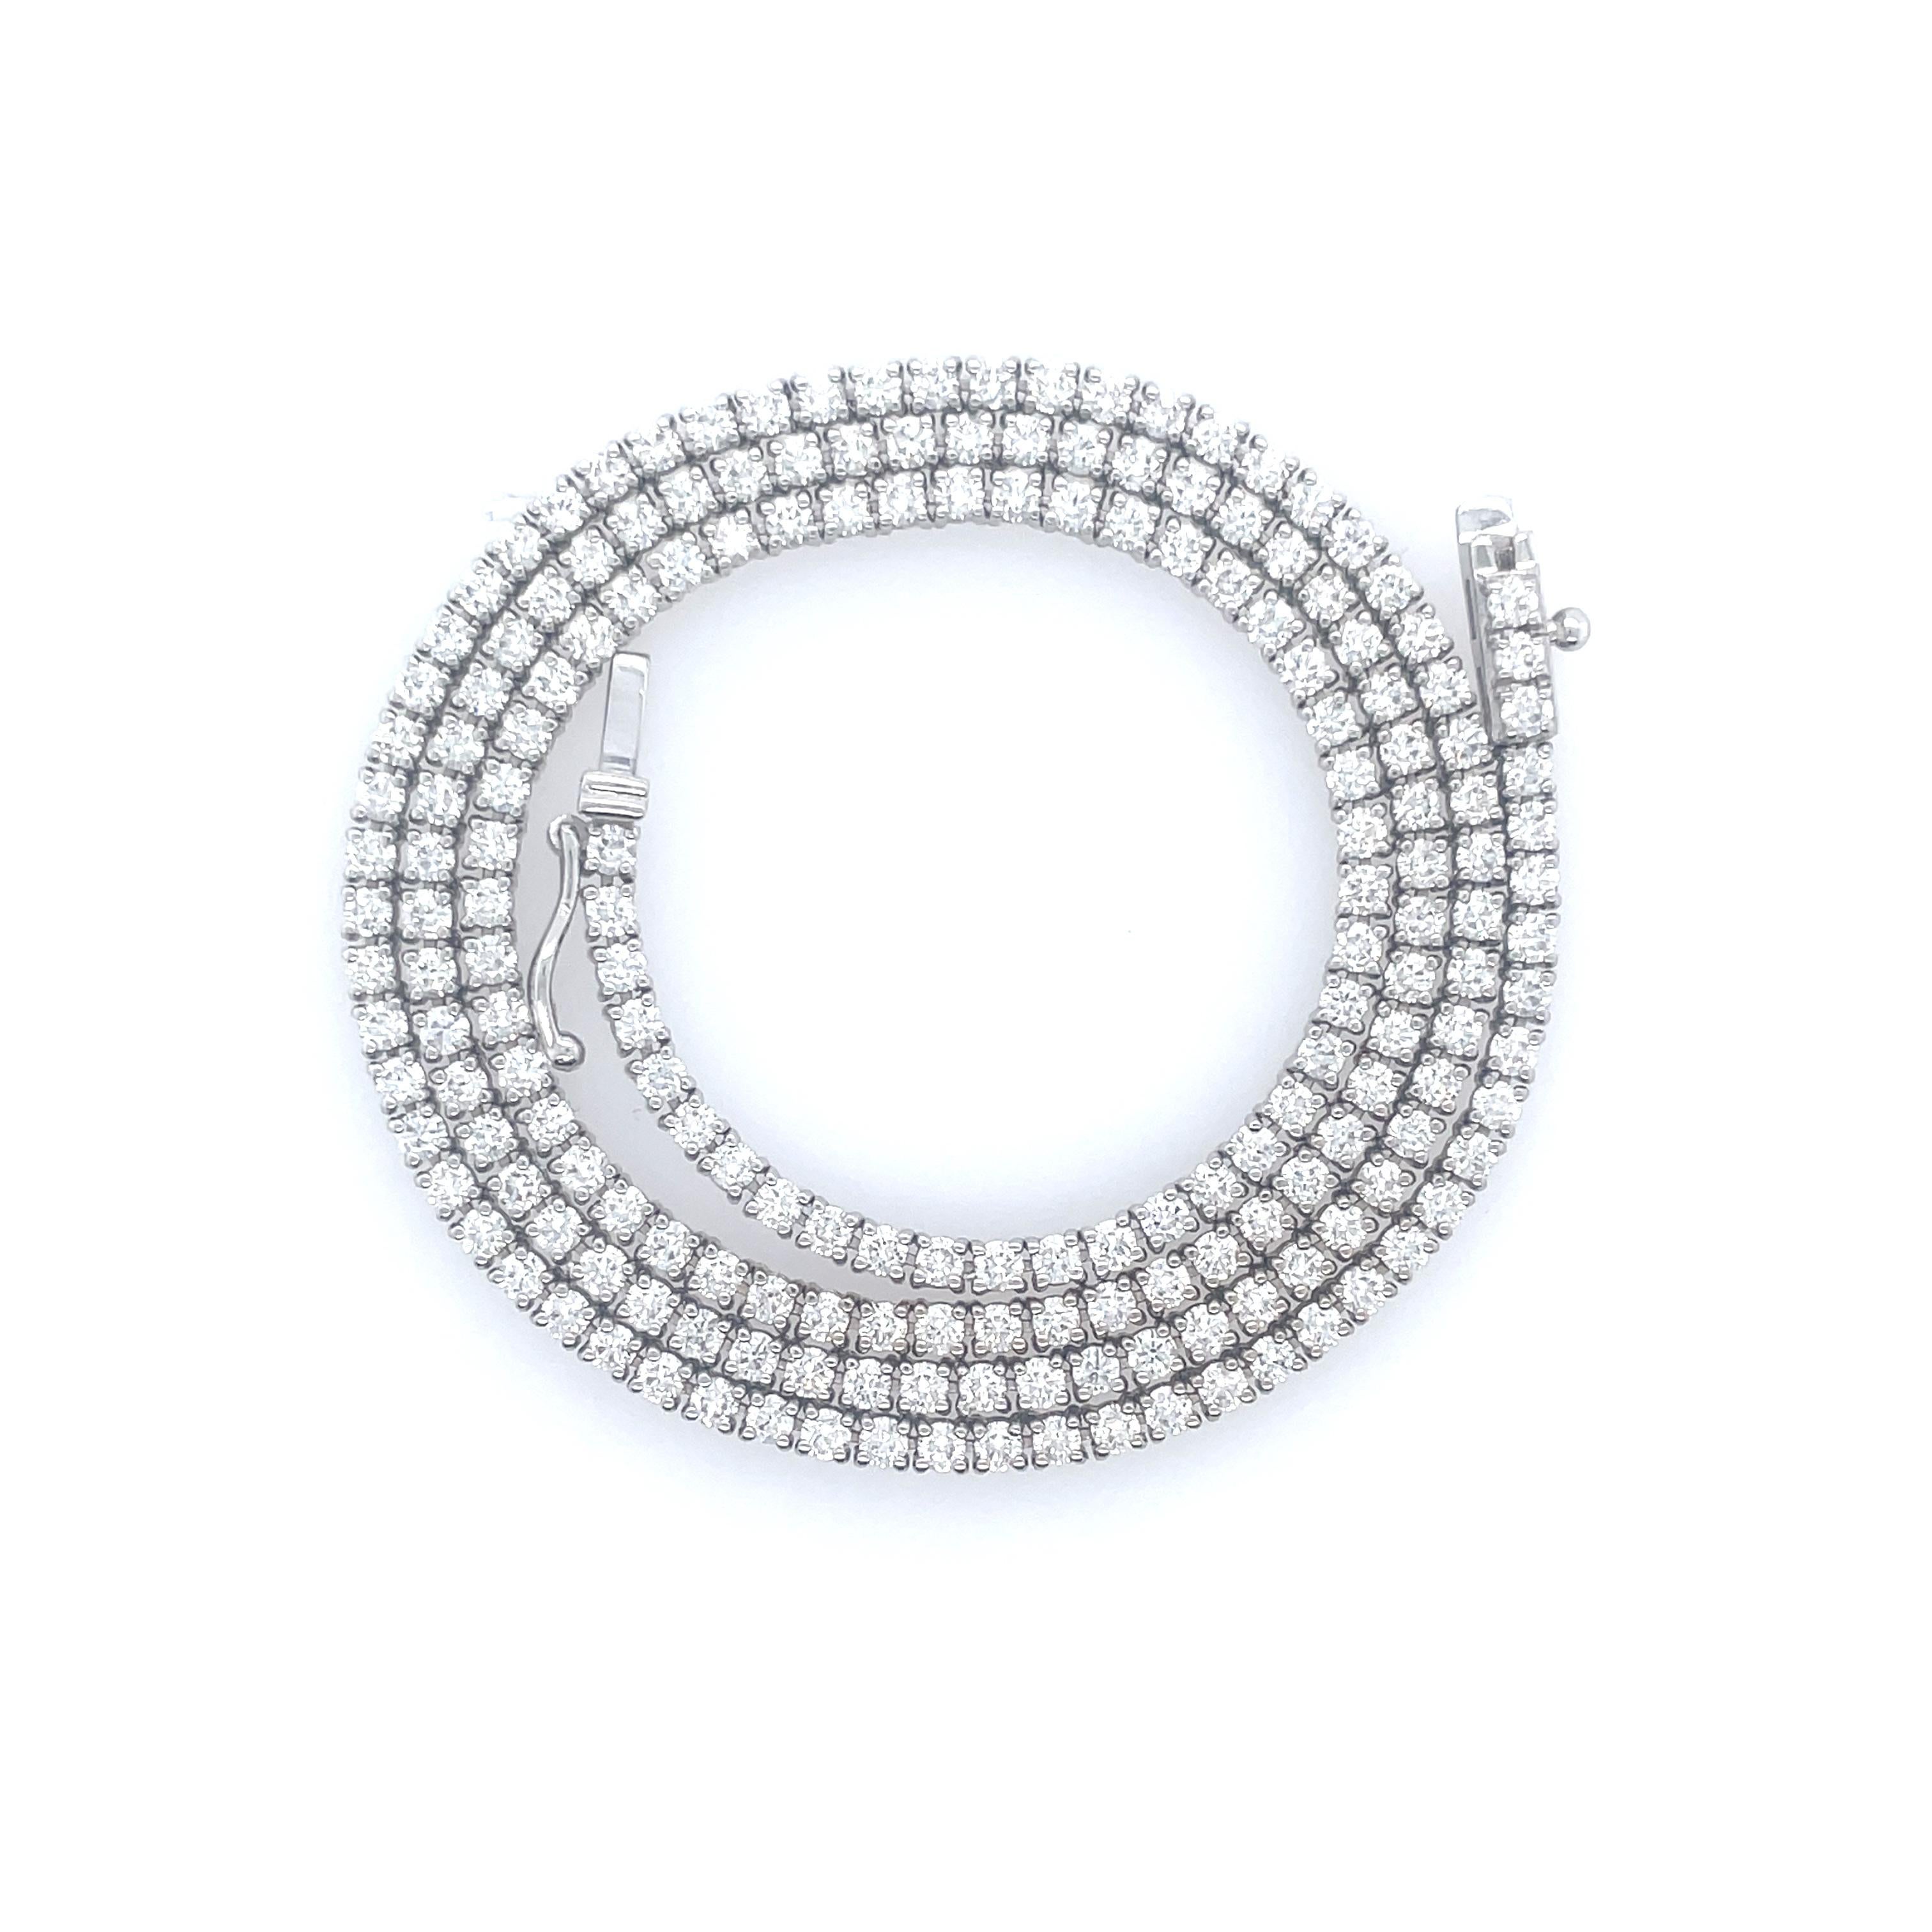 Round Cut 4.75 Carat Diamond Tennis Necklace with Round Diamonds in White Gold Chain For Sale